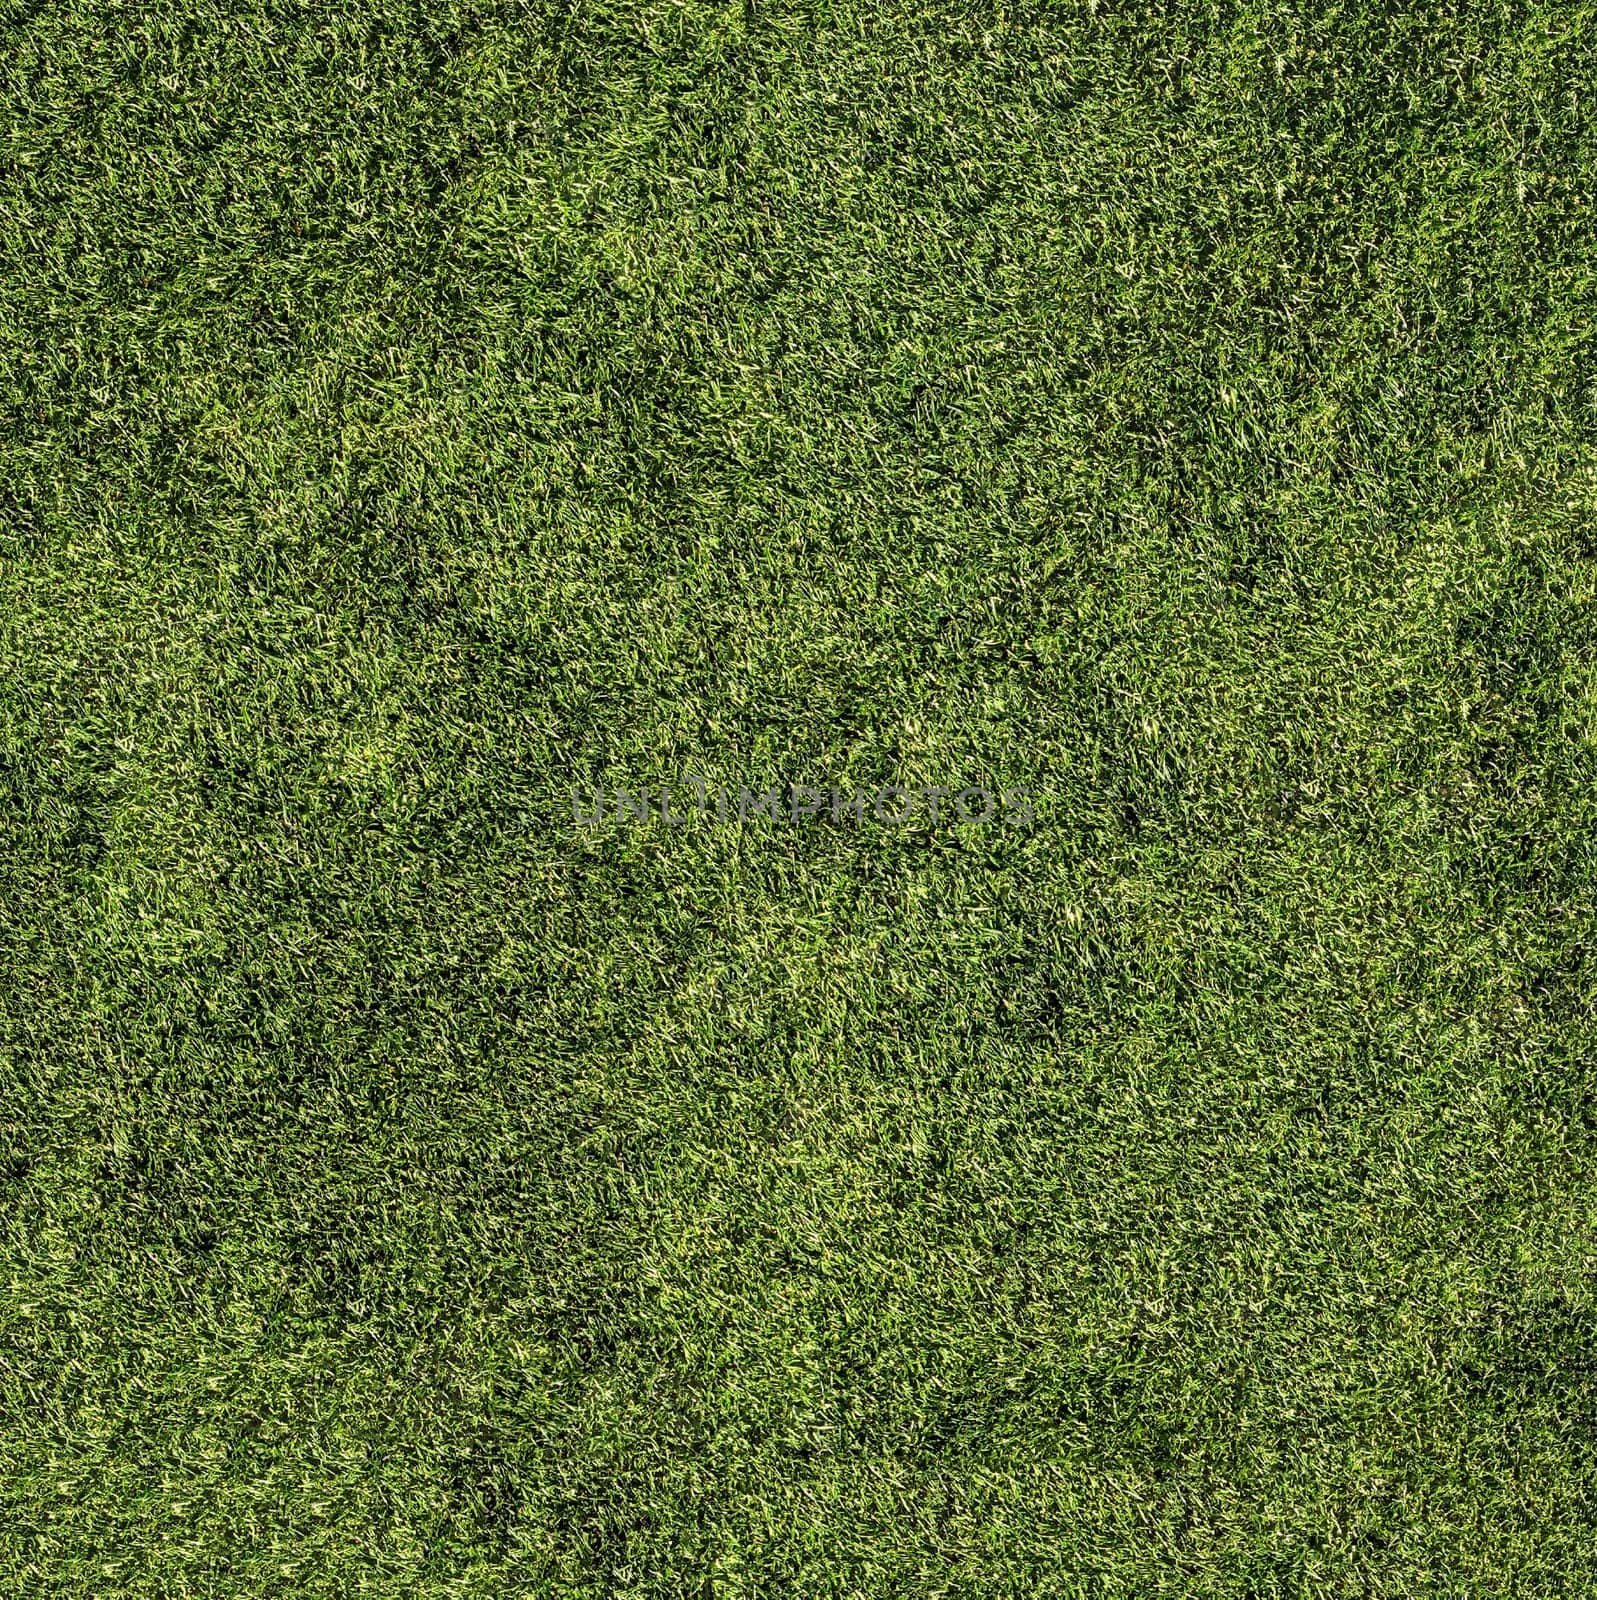 Background image of green grass close-up view from above